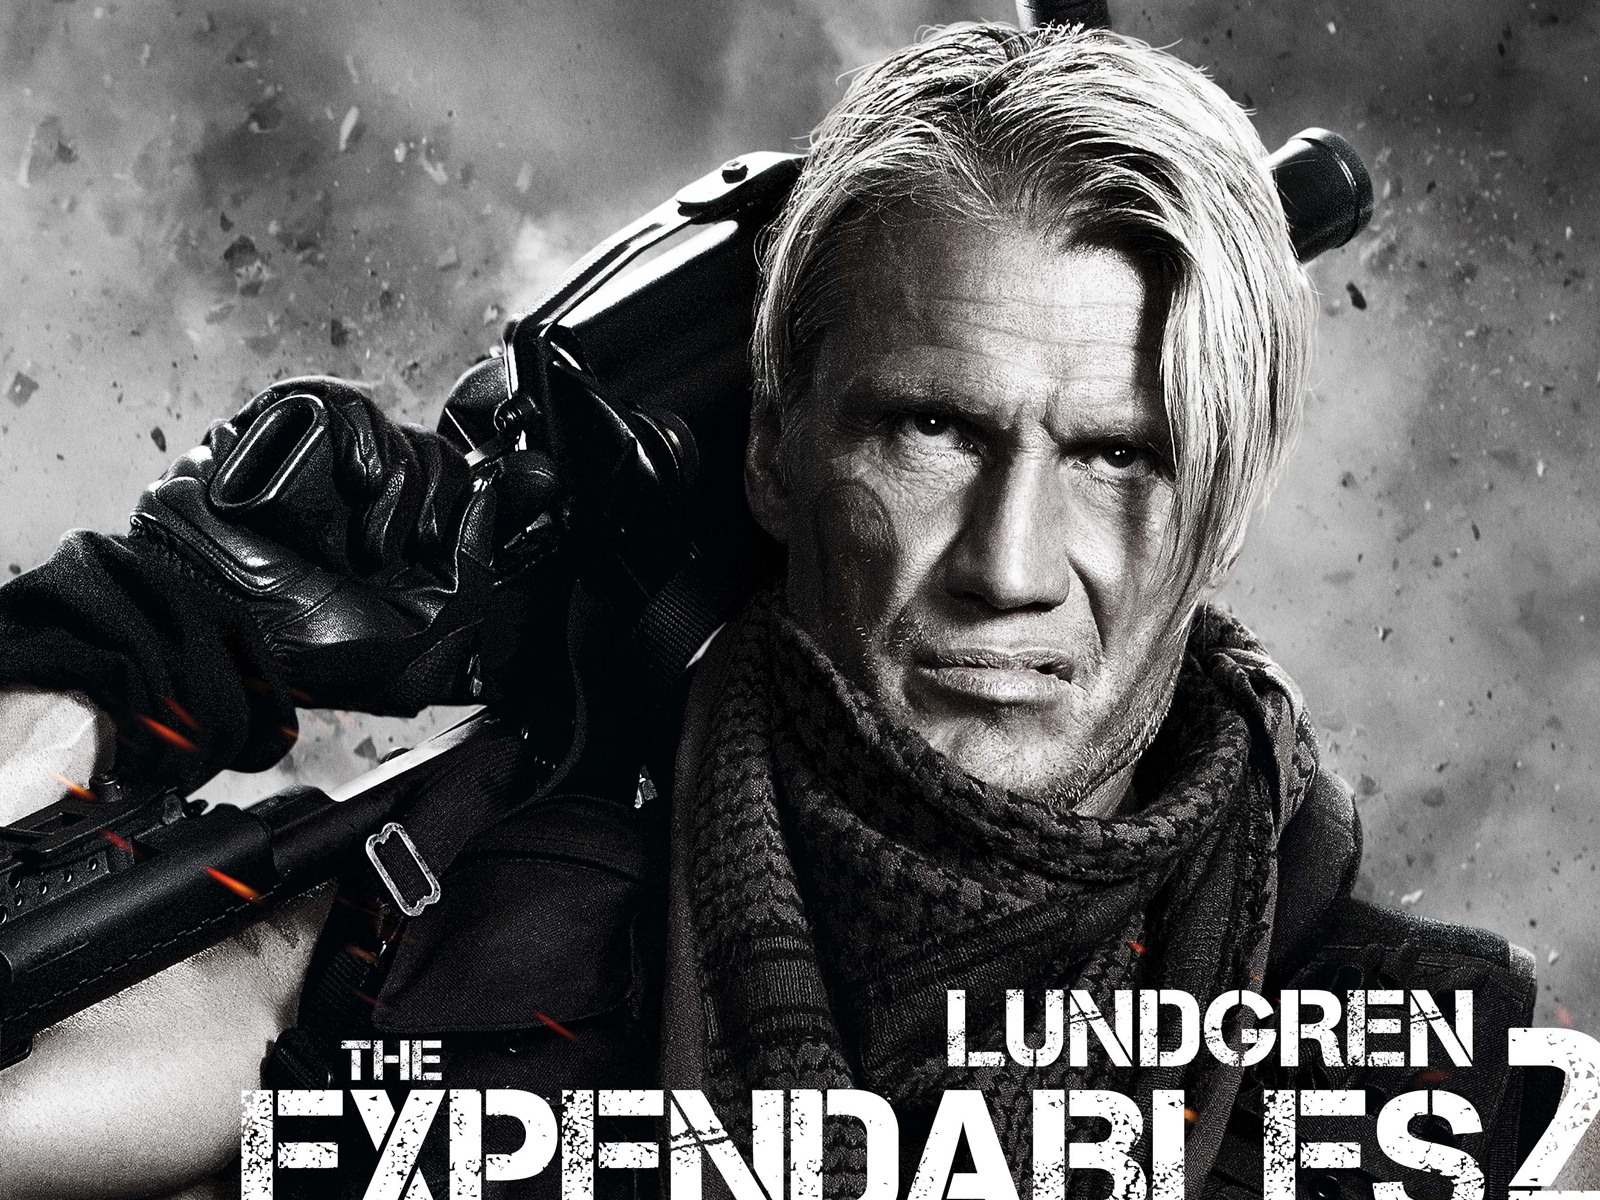 2012 The Expendables 2 敢死队2 高清壁纸3 - 1600x1200